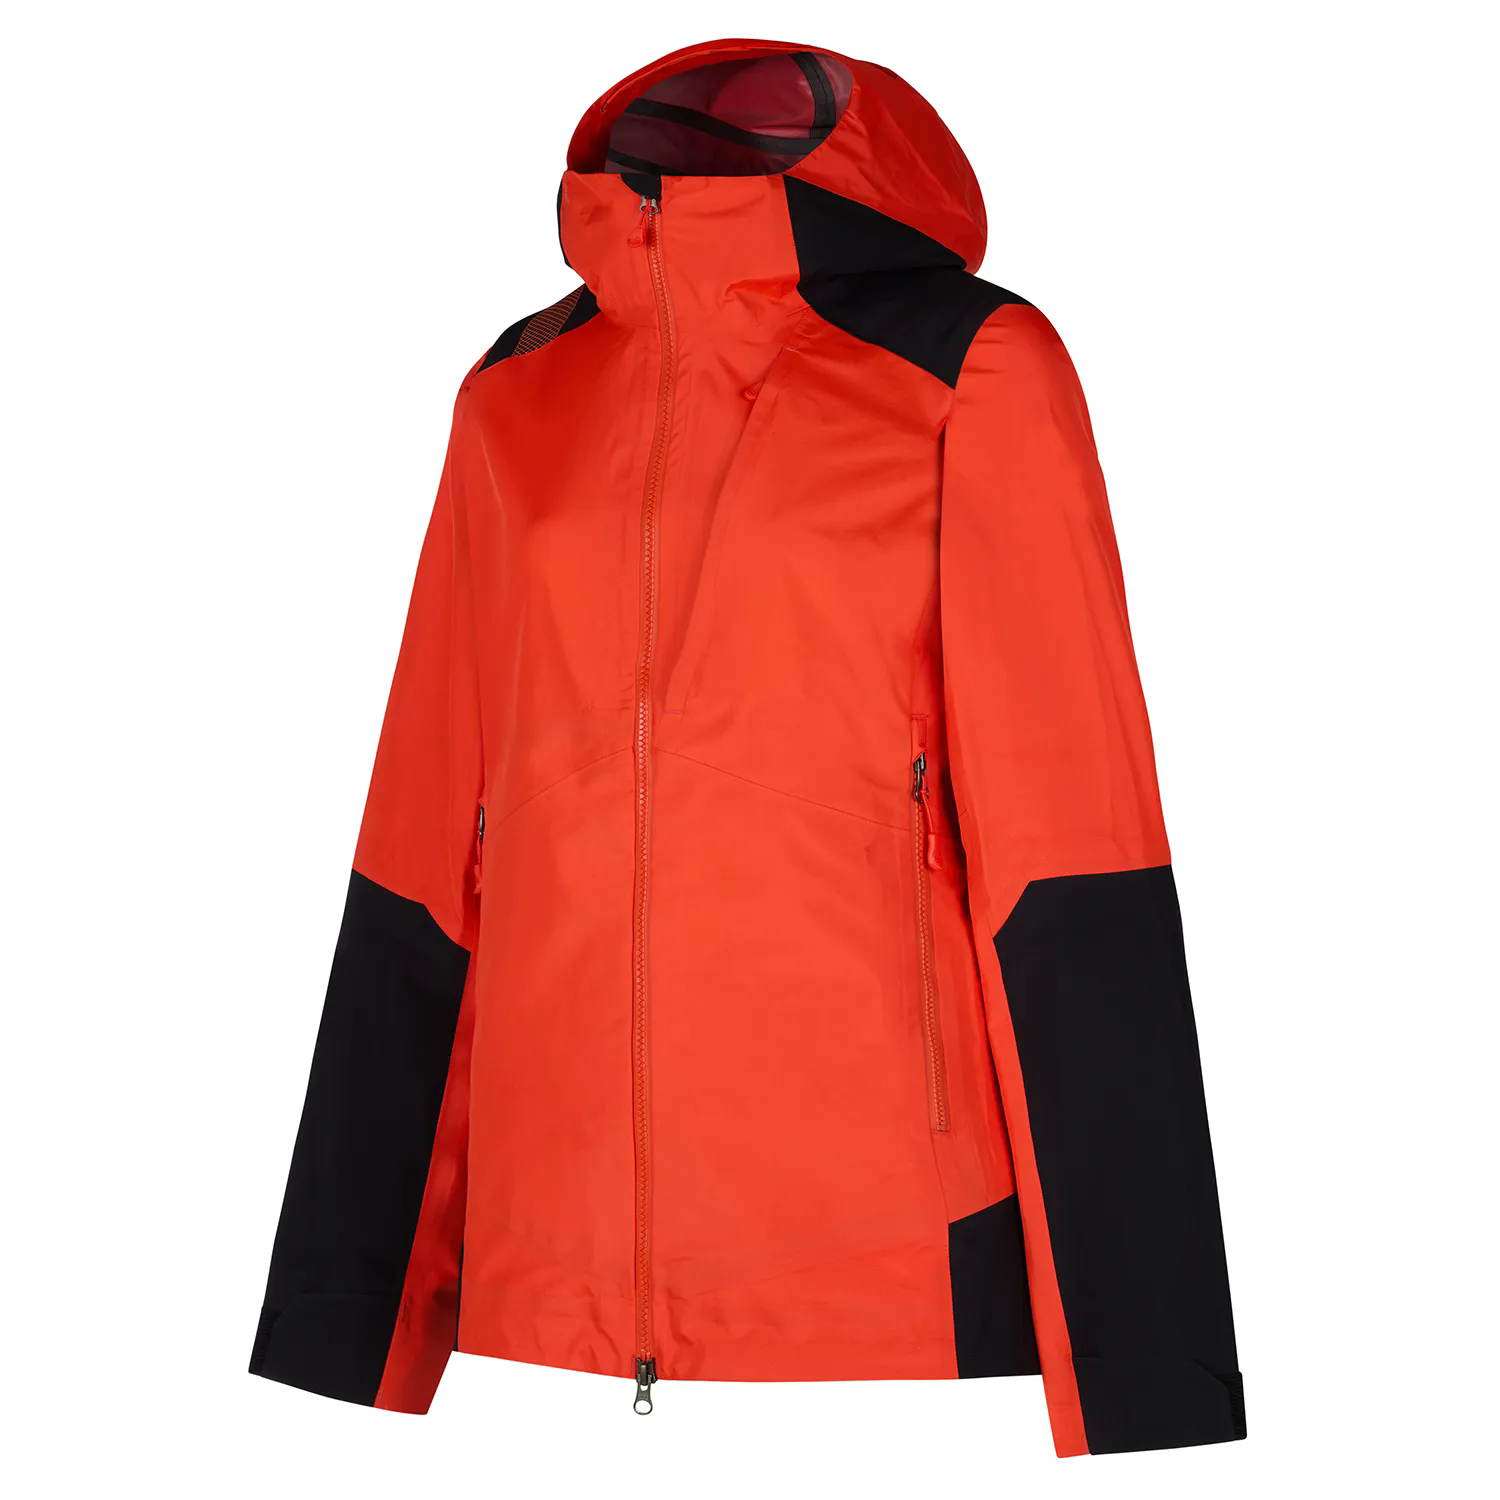 https://www.passionouterwear.com/mens-ski-mountaineering-jackets-2-product/